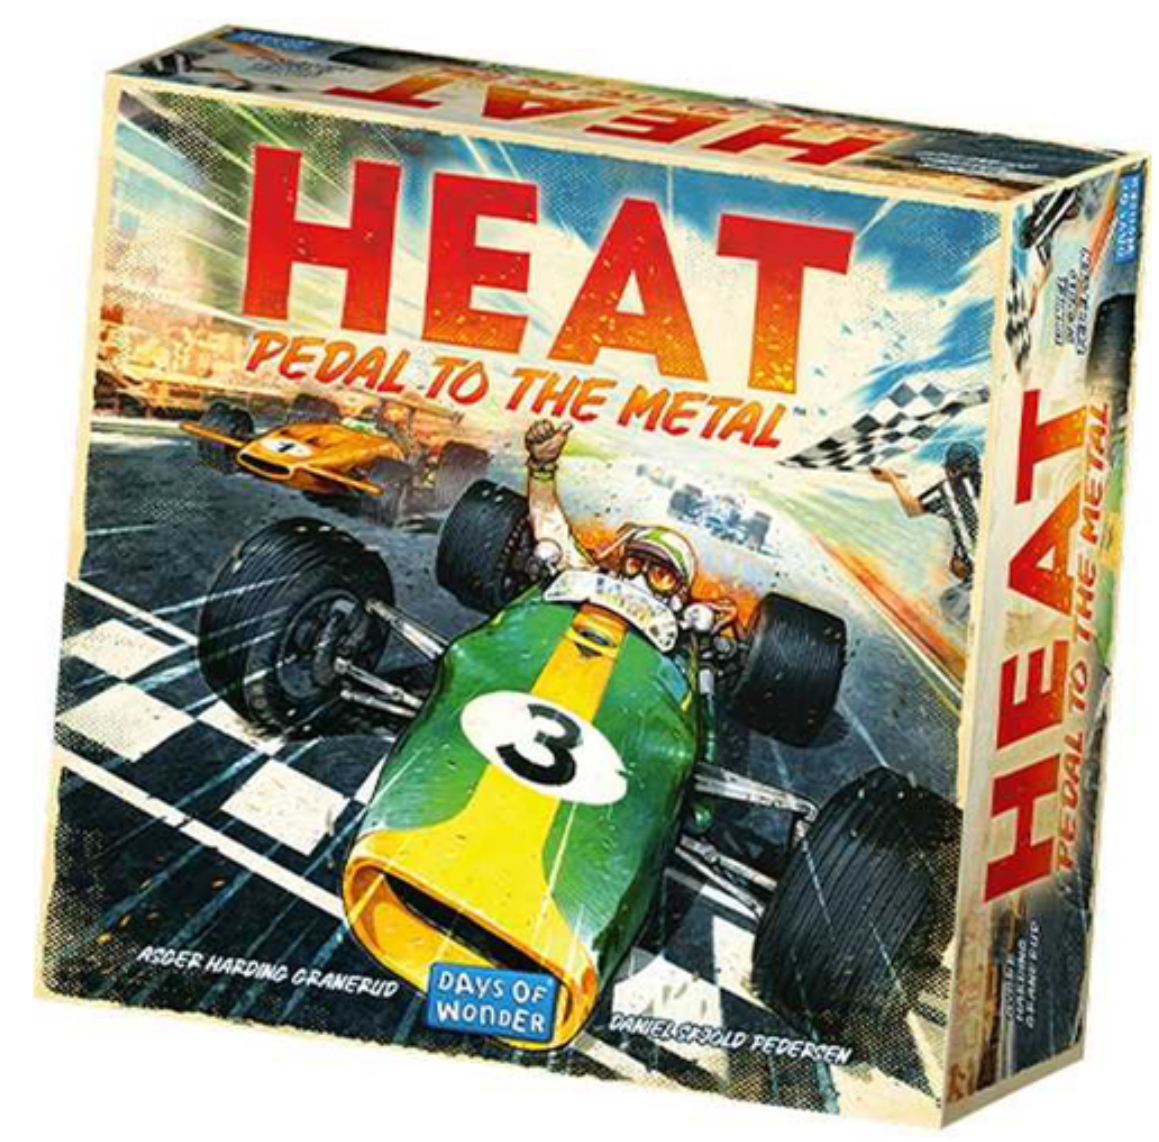 HEAT - Pedal to the Metal